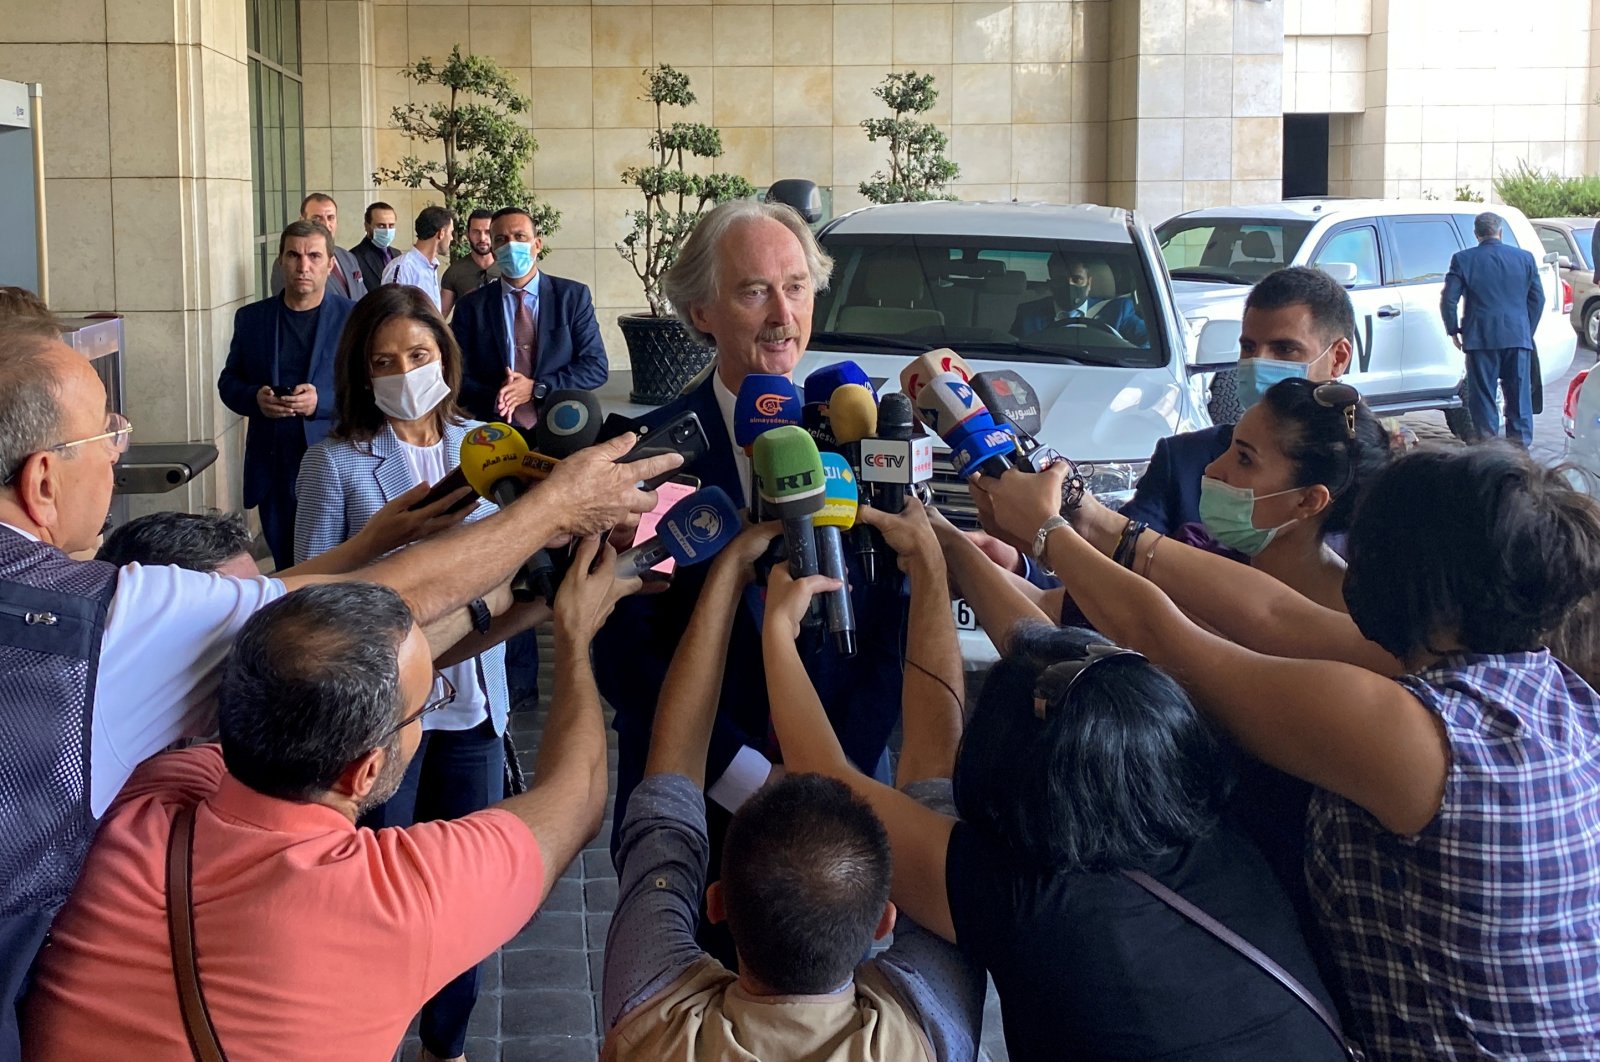 United Nations Special Envoy for Syria Geir Pedersen speaks to journalists outside a hotel in Damascus, Syria Sept.11, 2021. (Reuters File Photo)